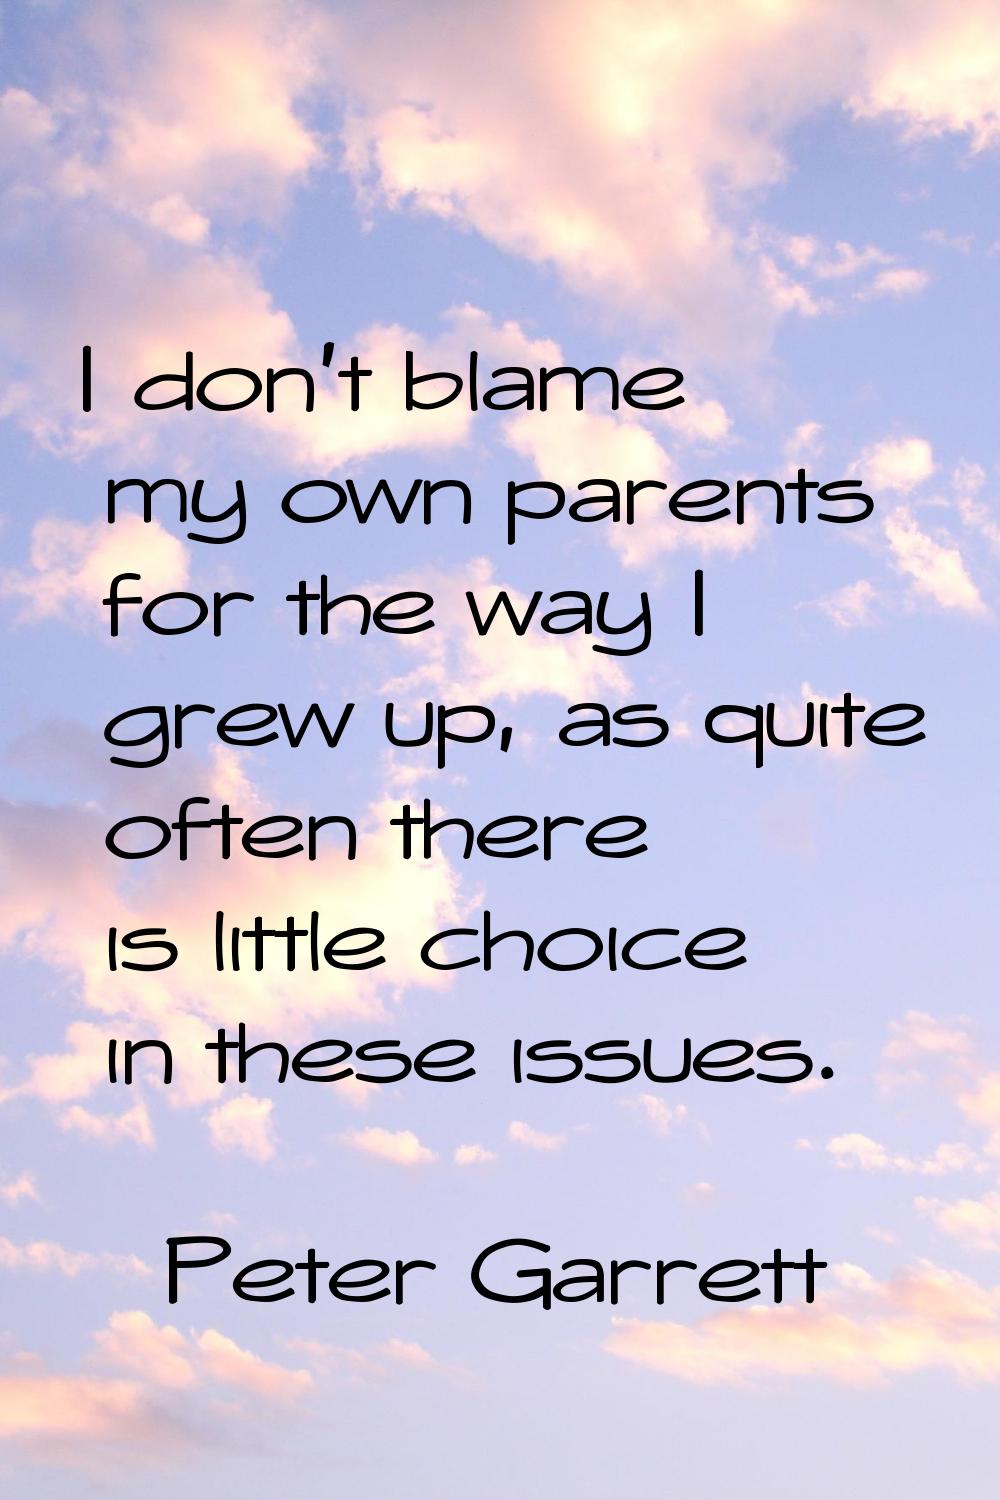 I don't blame my own parents for the way I grew up, as quite often there is little choice in these 